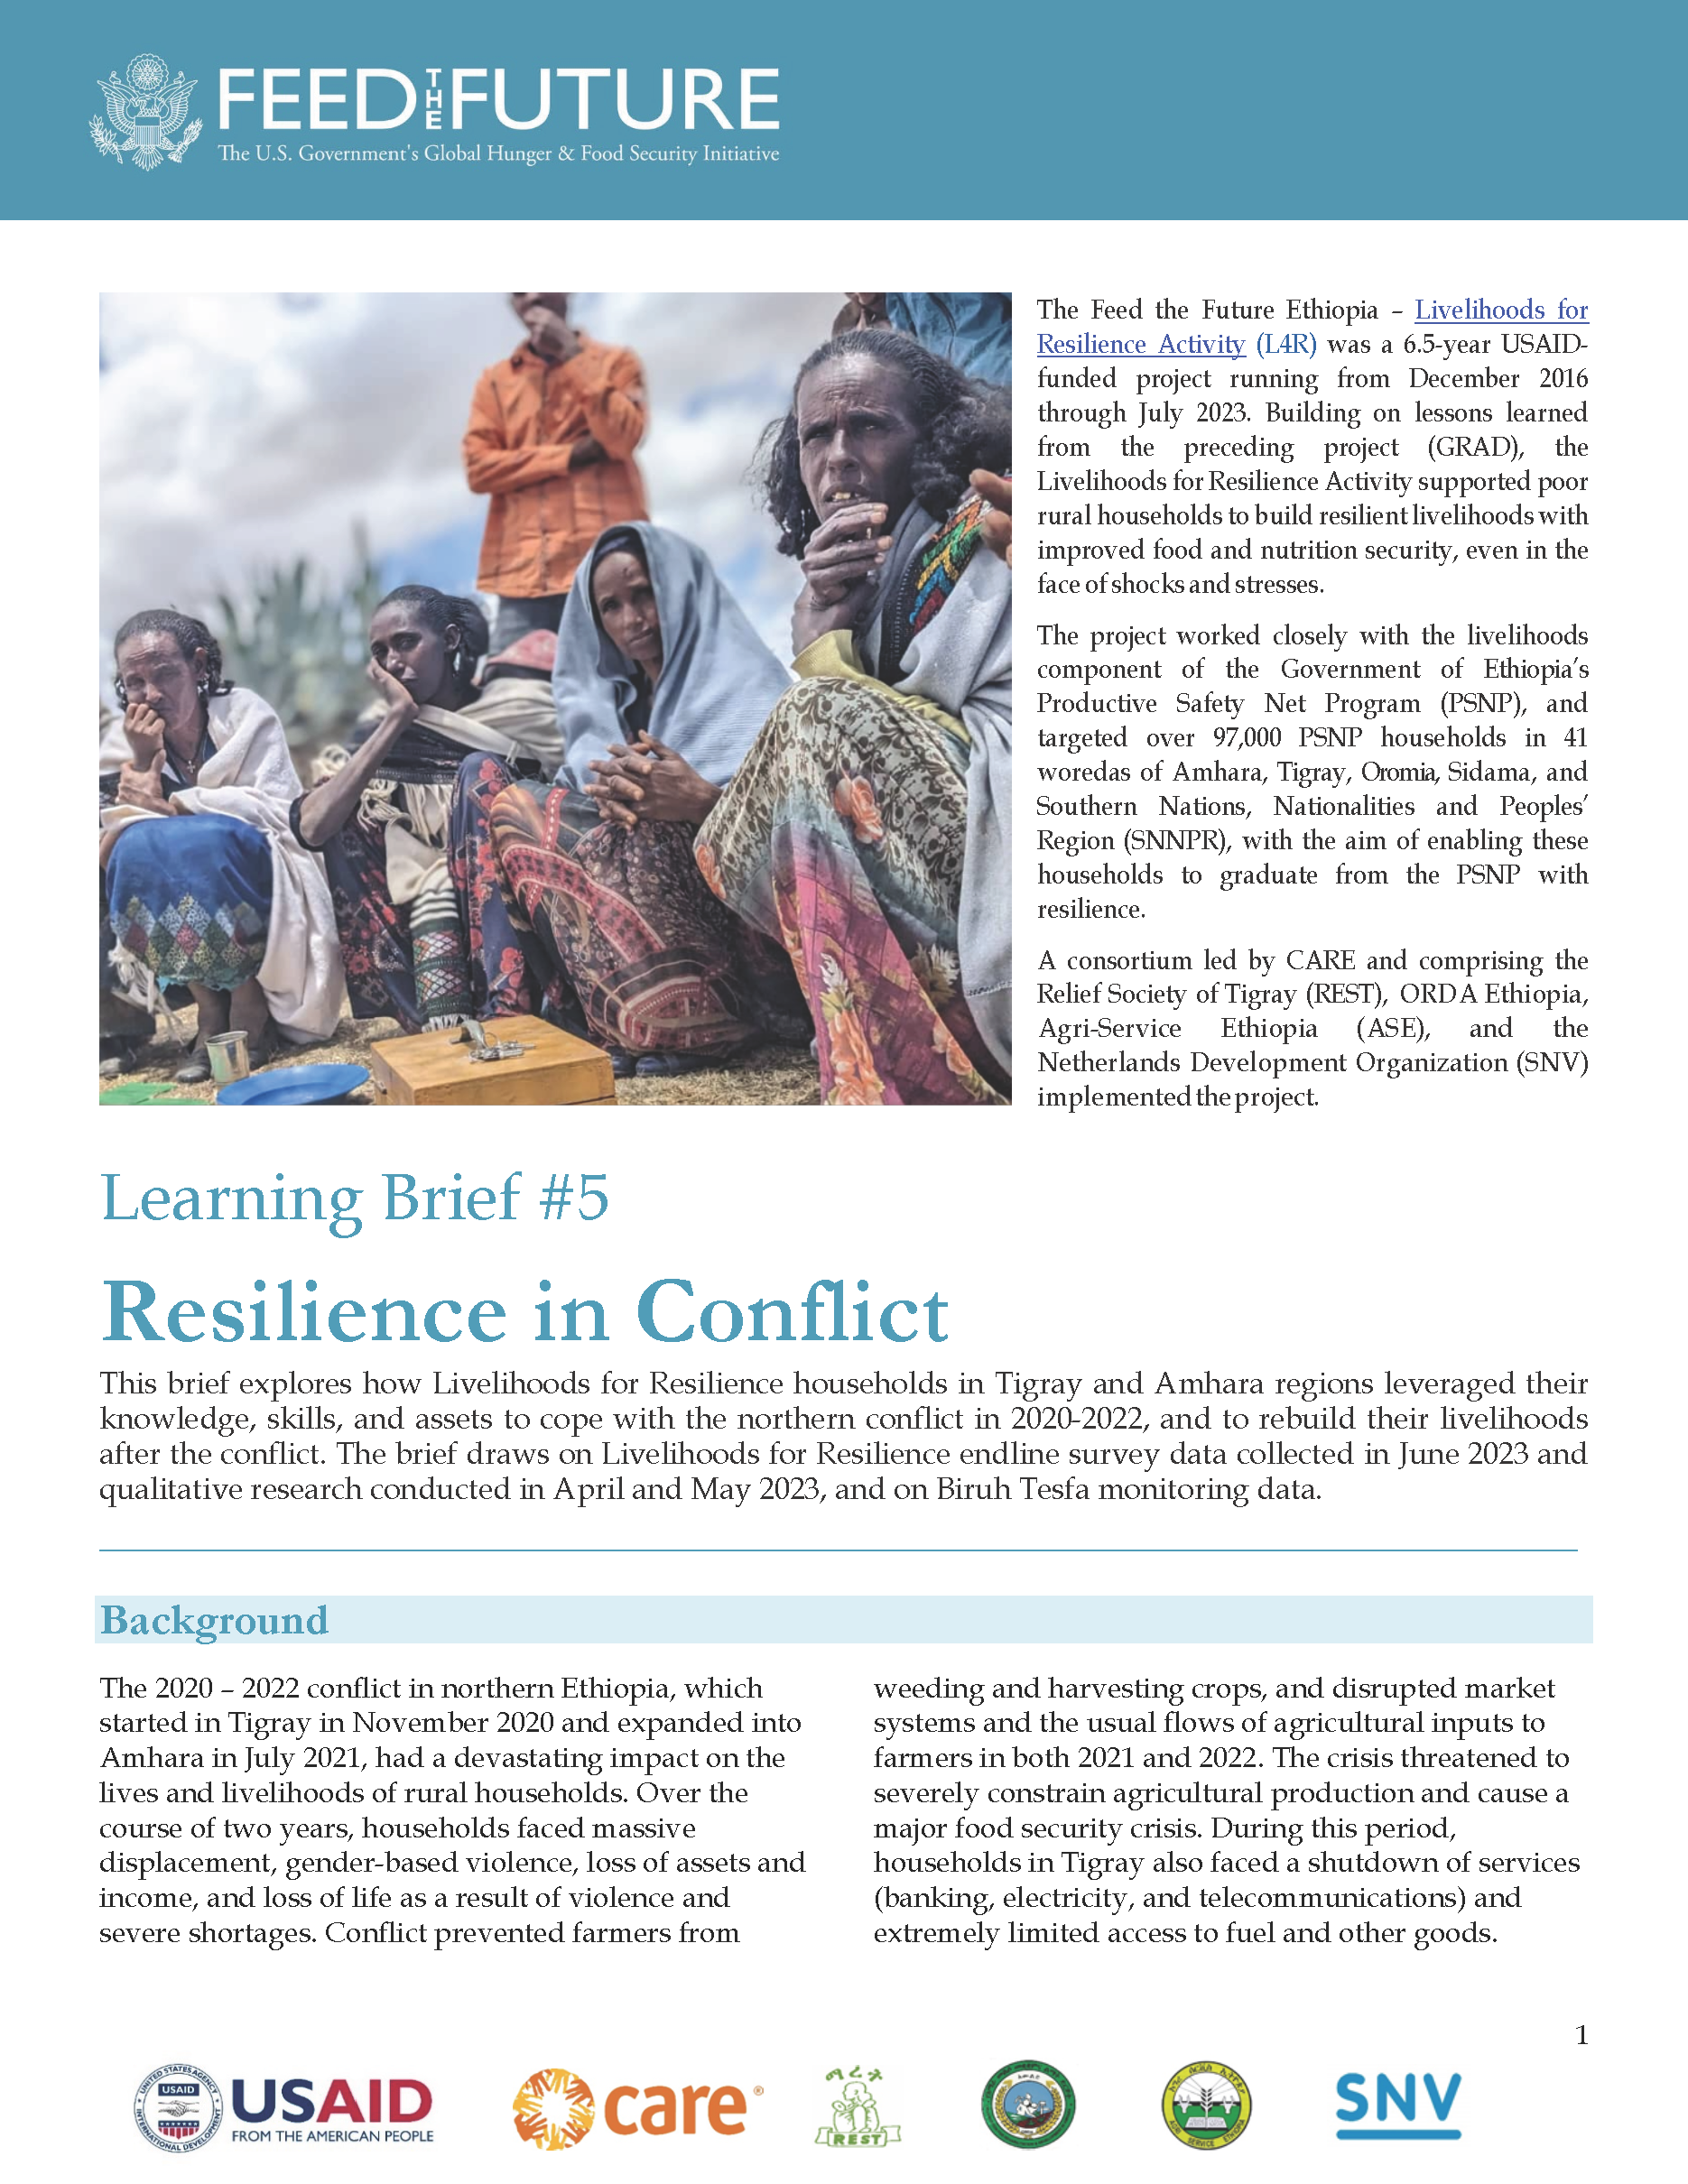 Cover page for Resilience in Conflict Learning Brief